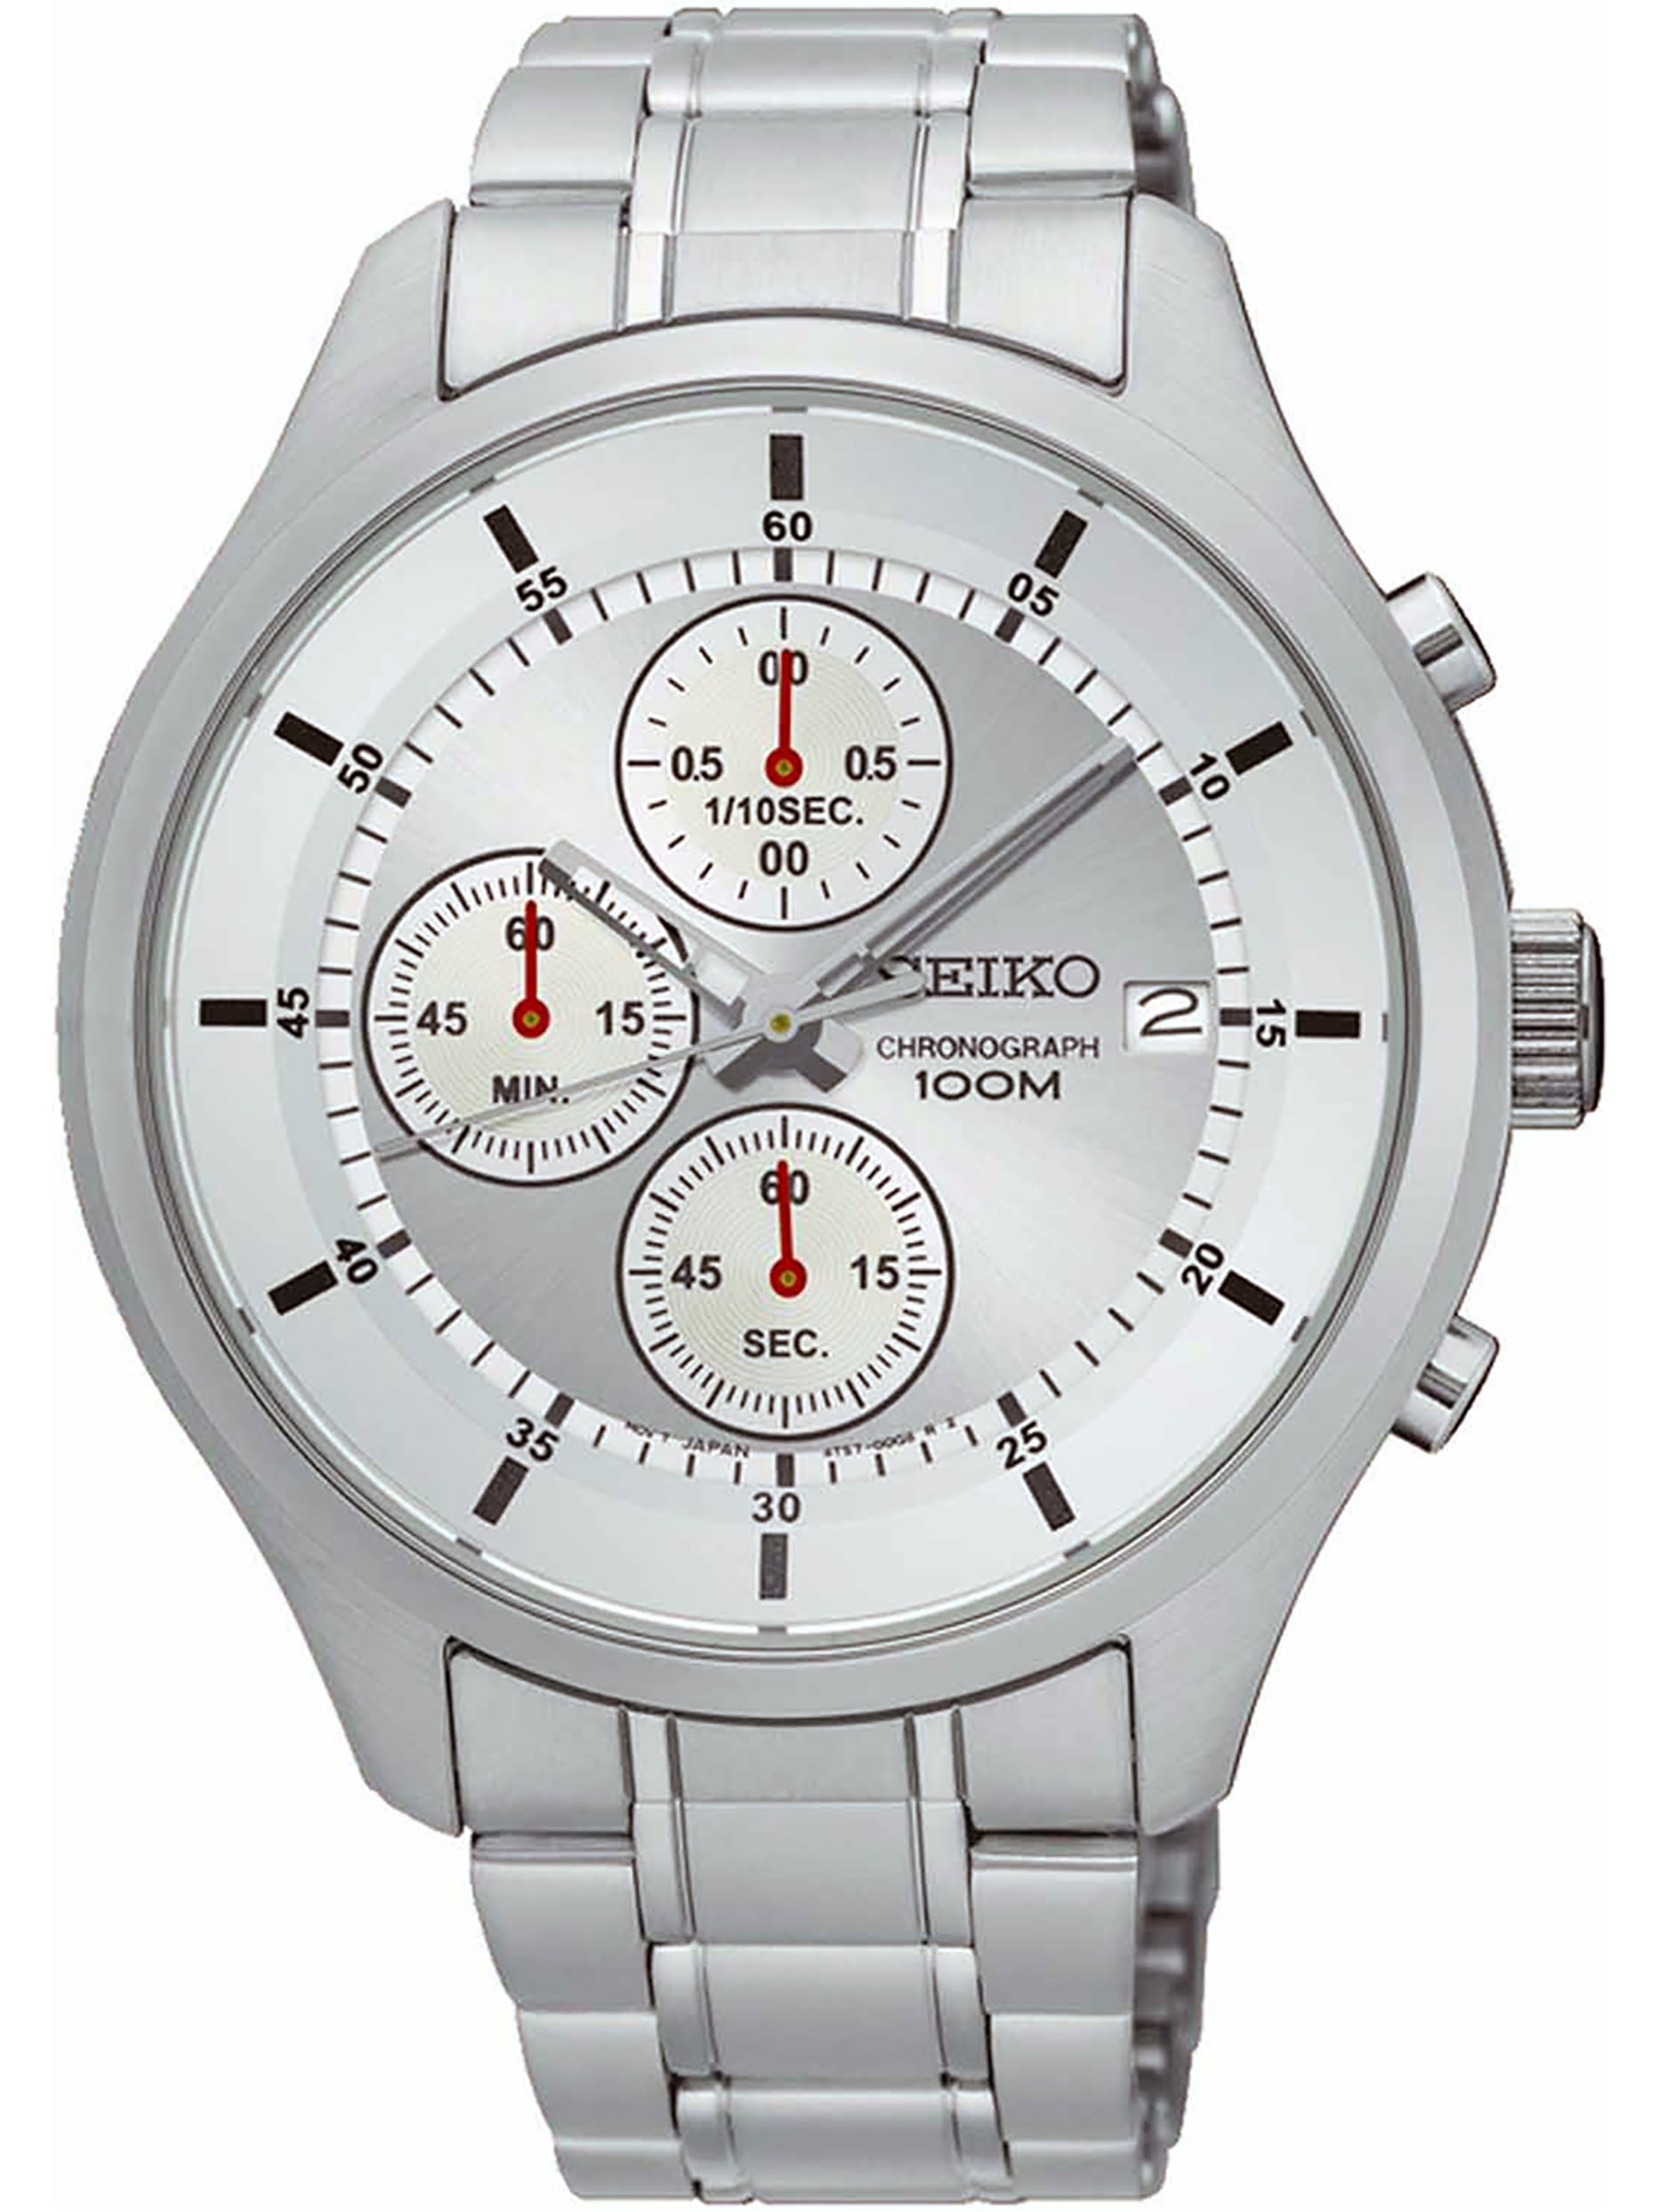 SEIKO SKS535P1,Men's Chronograph,stainless steel case and  bracelert,date,100m WR,SKS535 